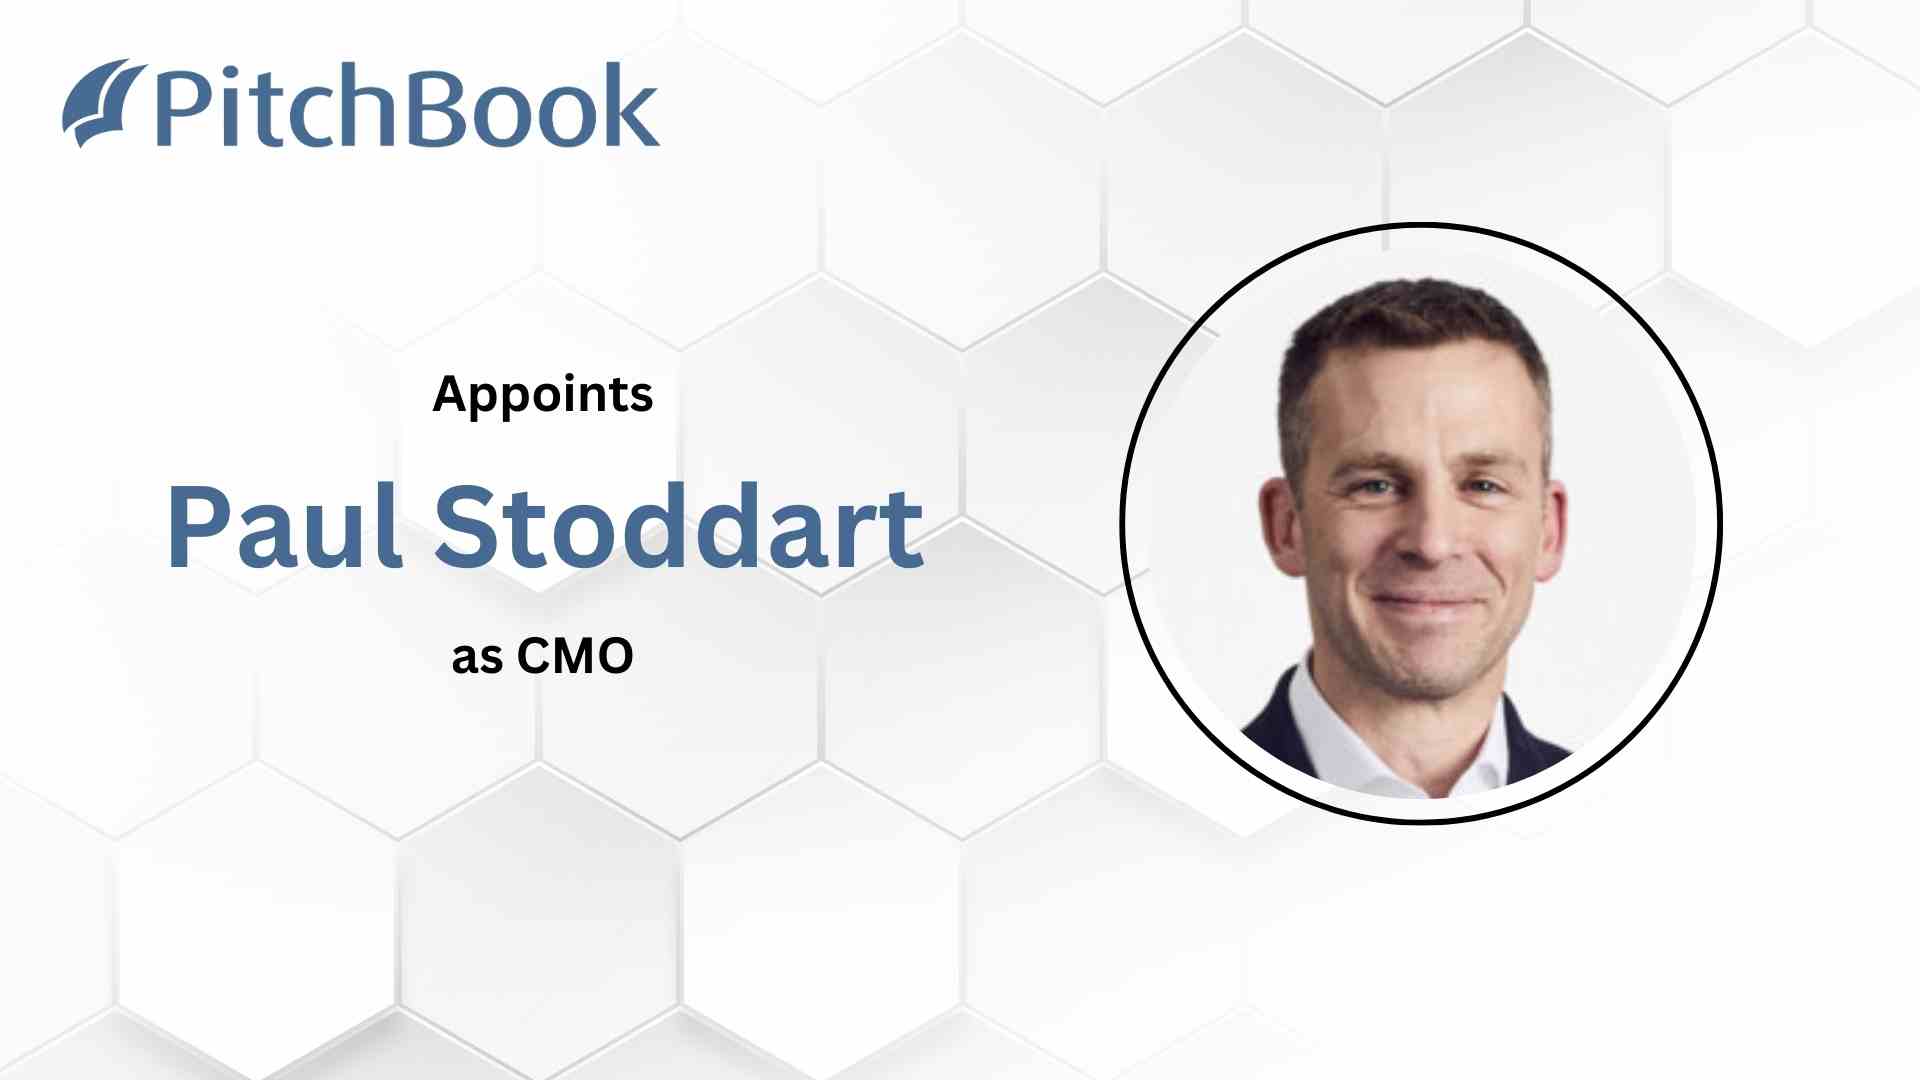 PitchBook Appoints Paul Stoddart as Chief Marketing Officer